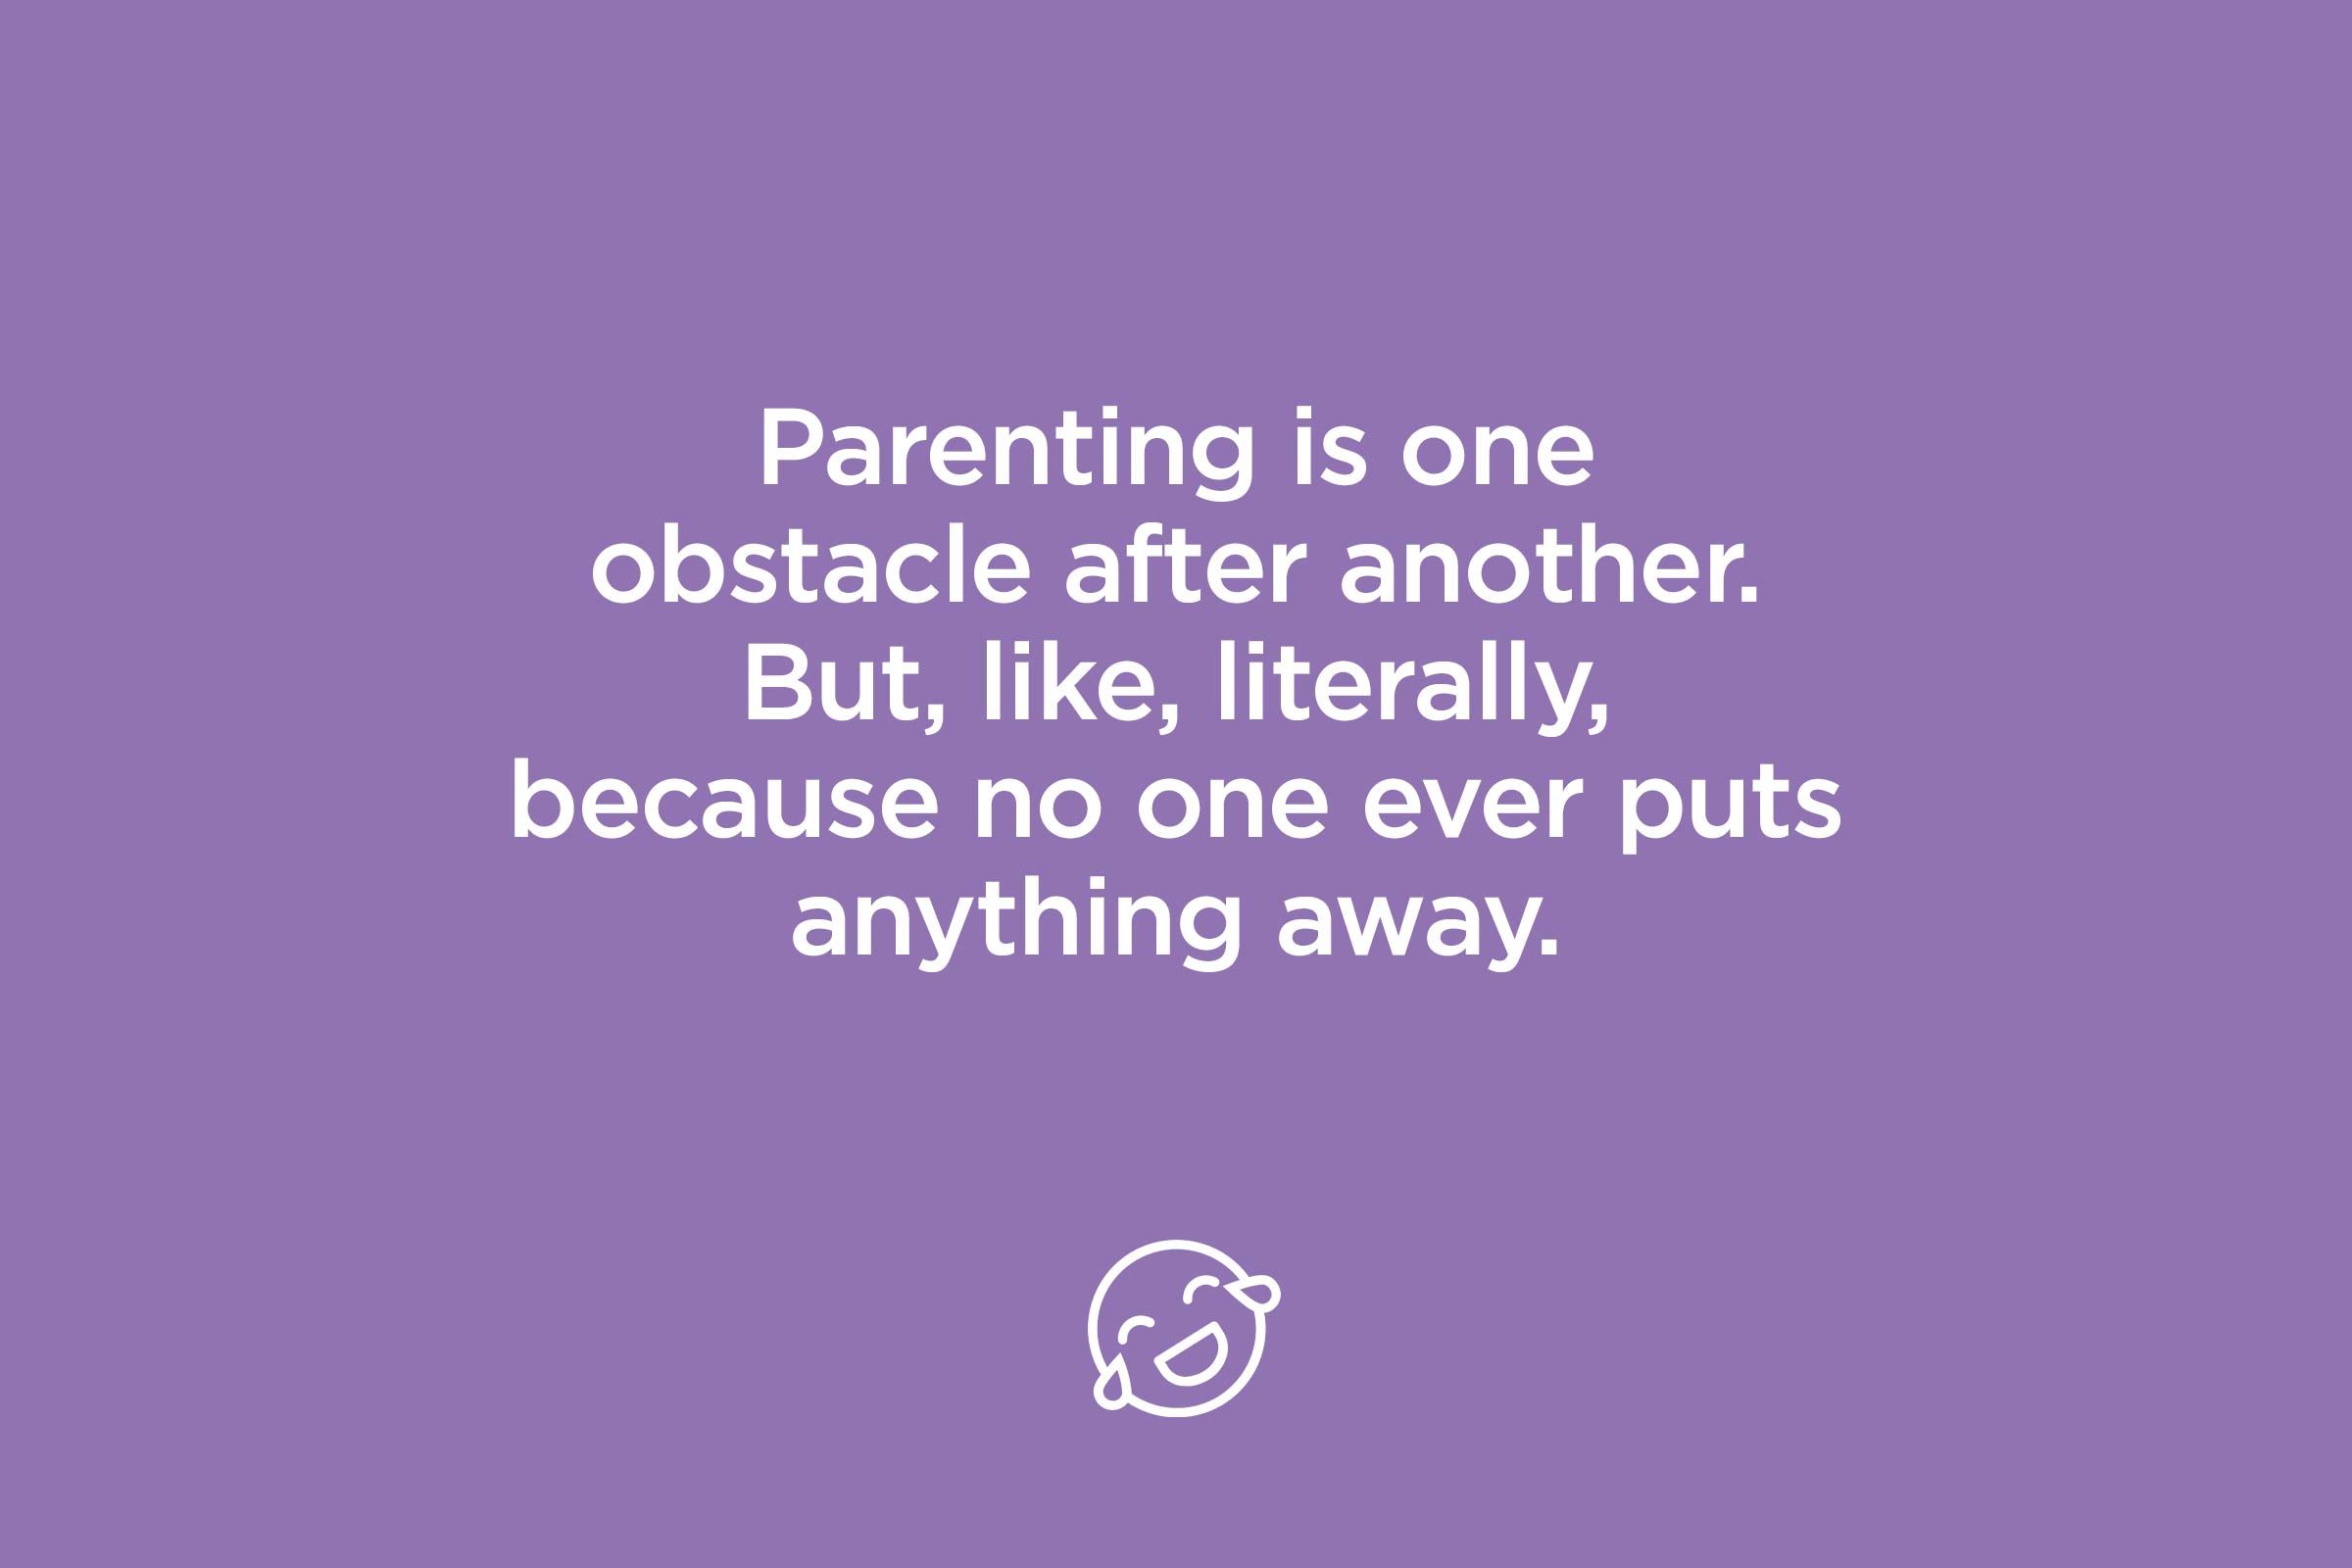 parenting is one obstacle after another